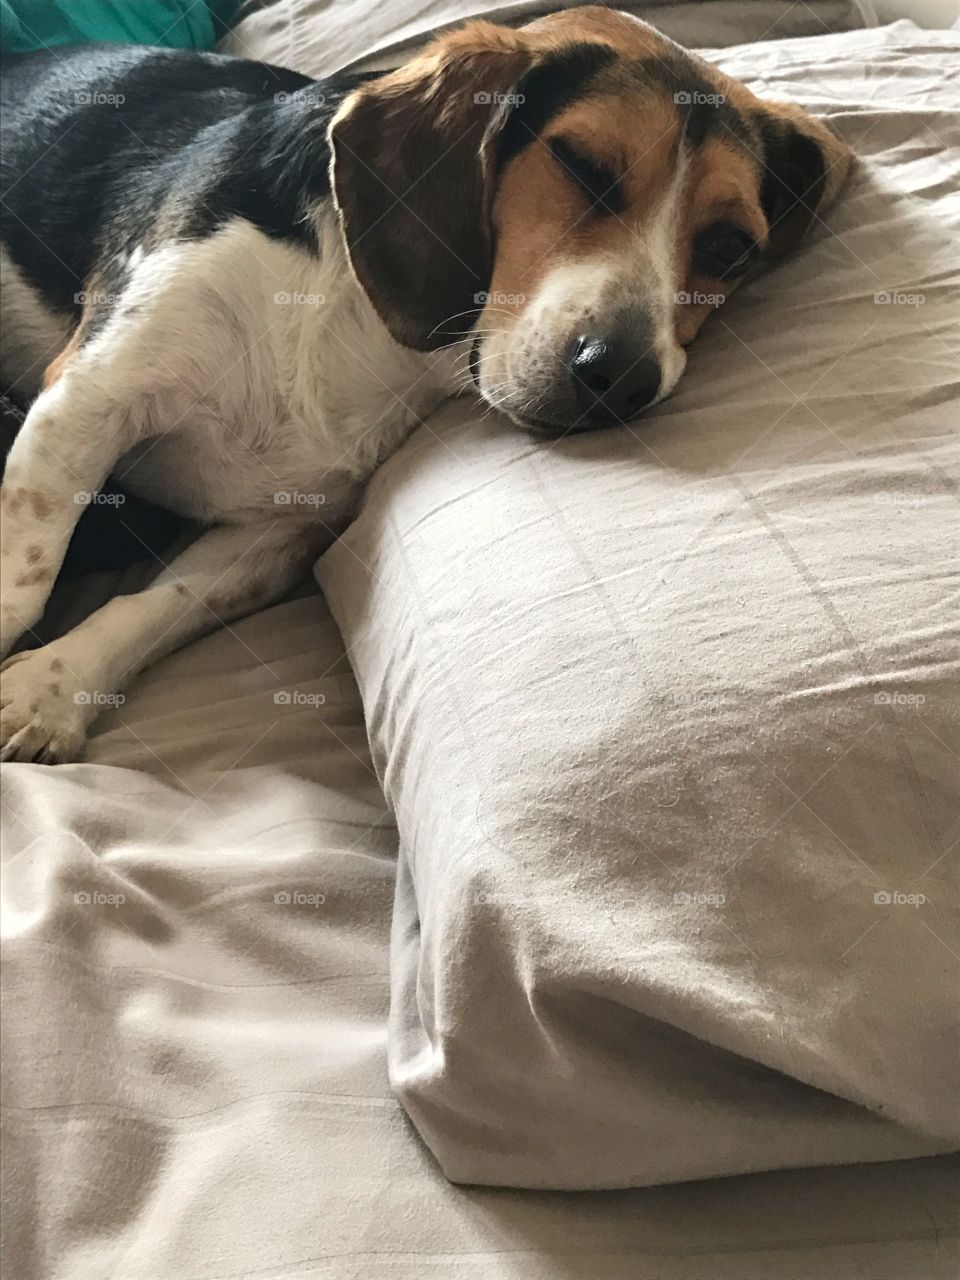 Beagle taking up his mommy's spot in bed!